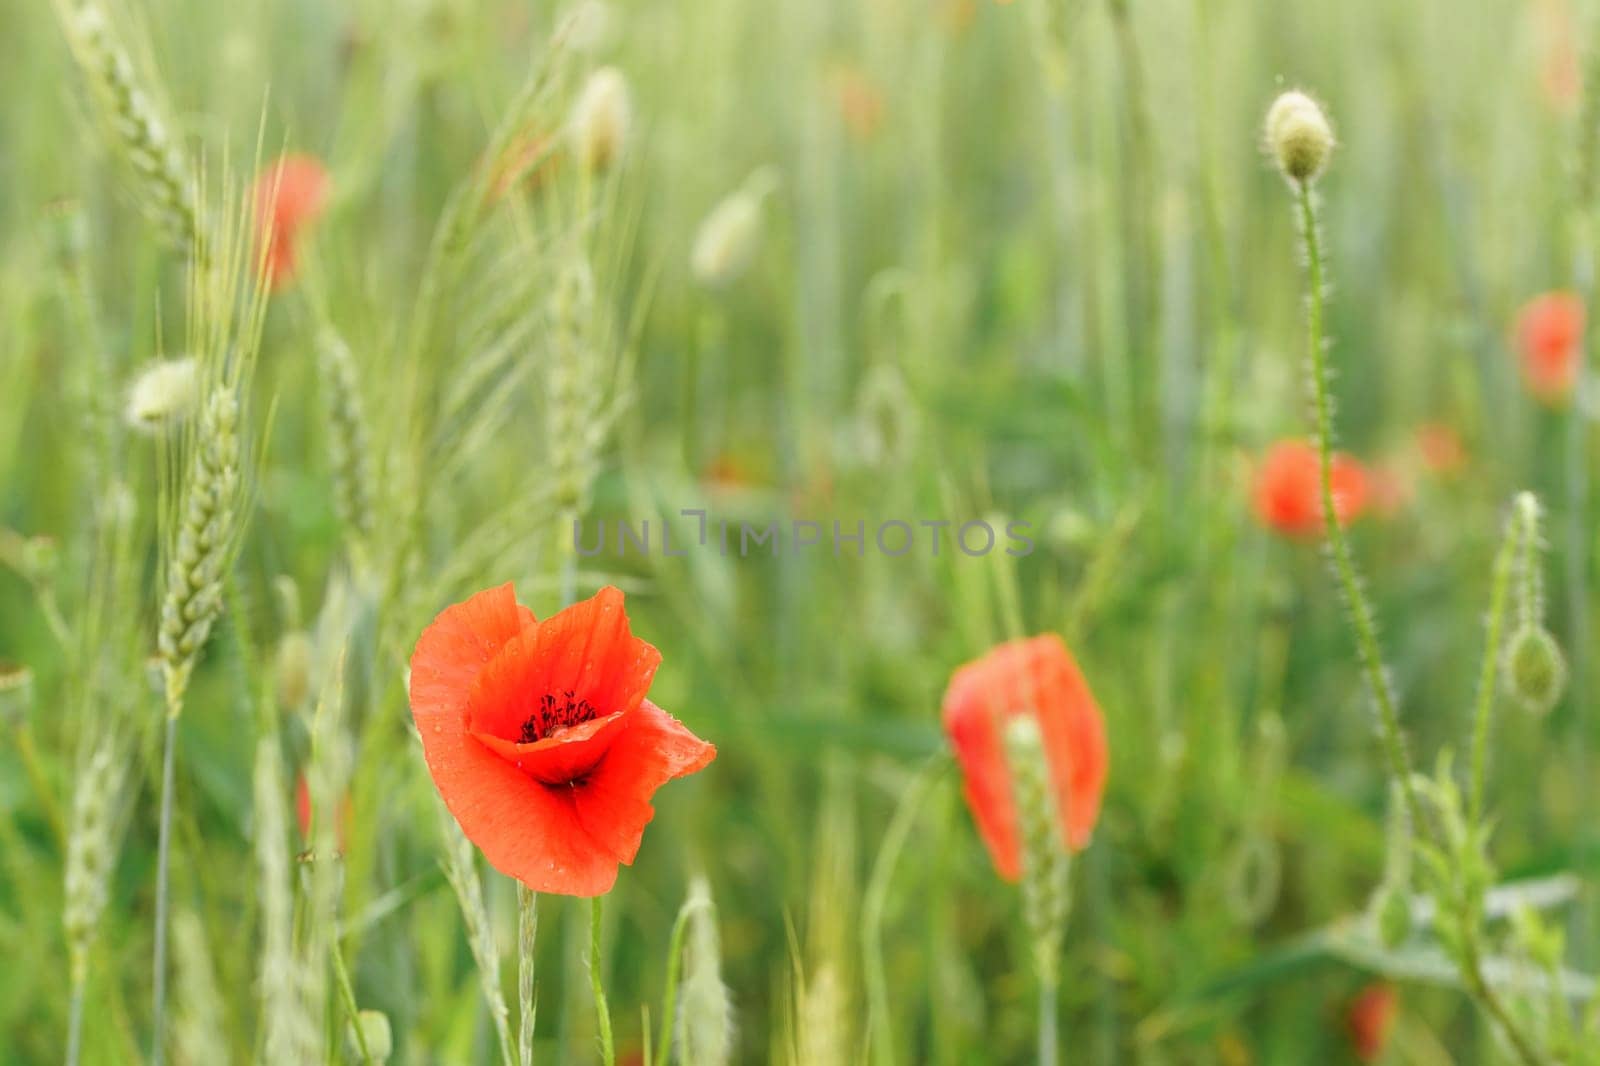 Bright red poppies growing in field of green unripe wheat by Ivanko